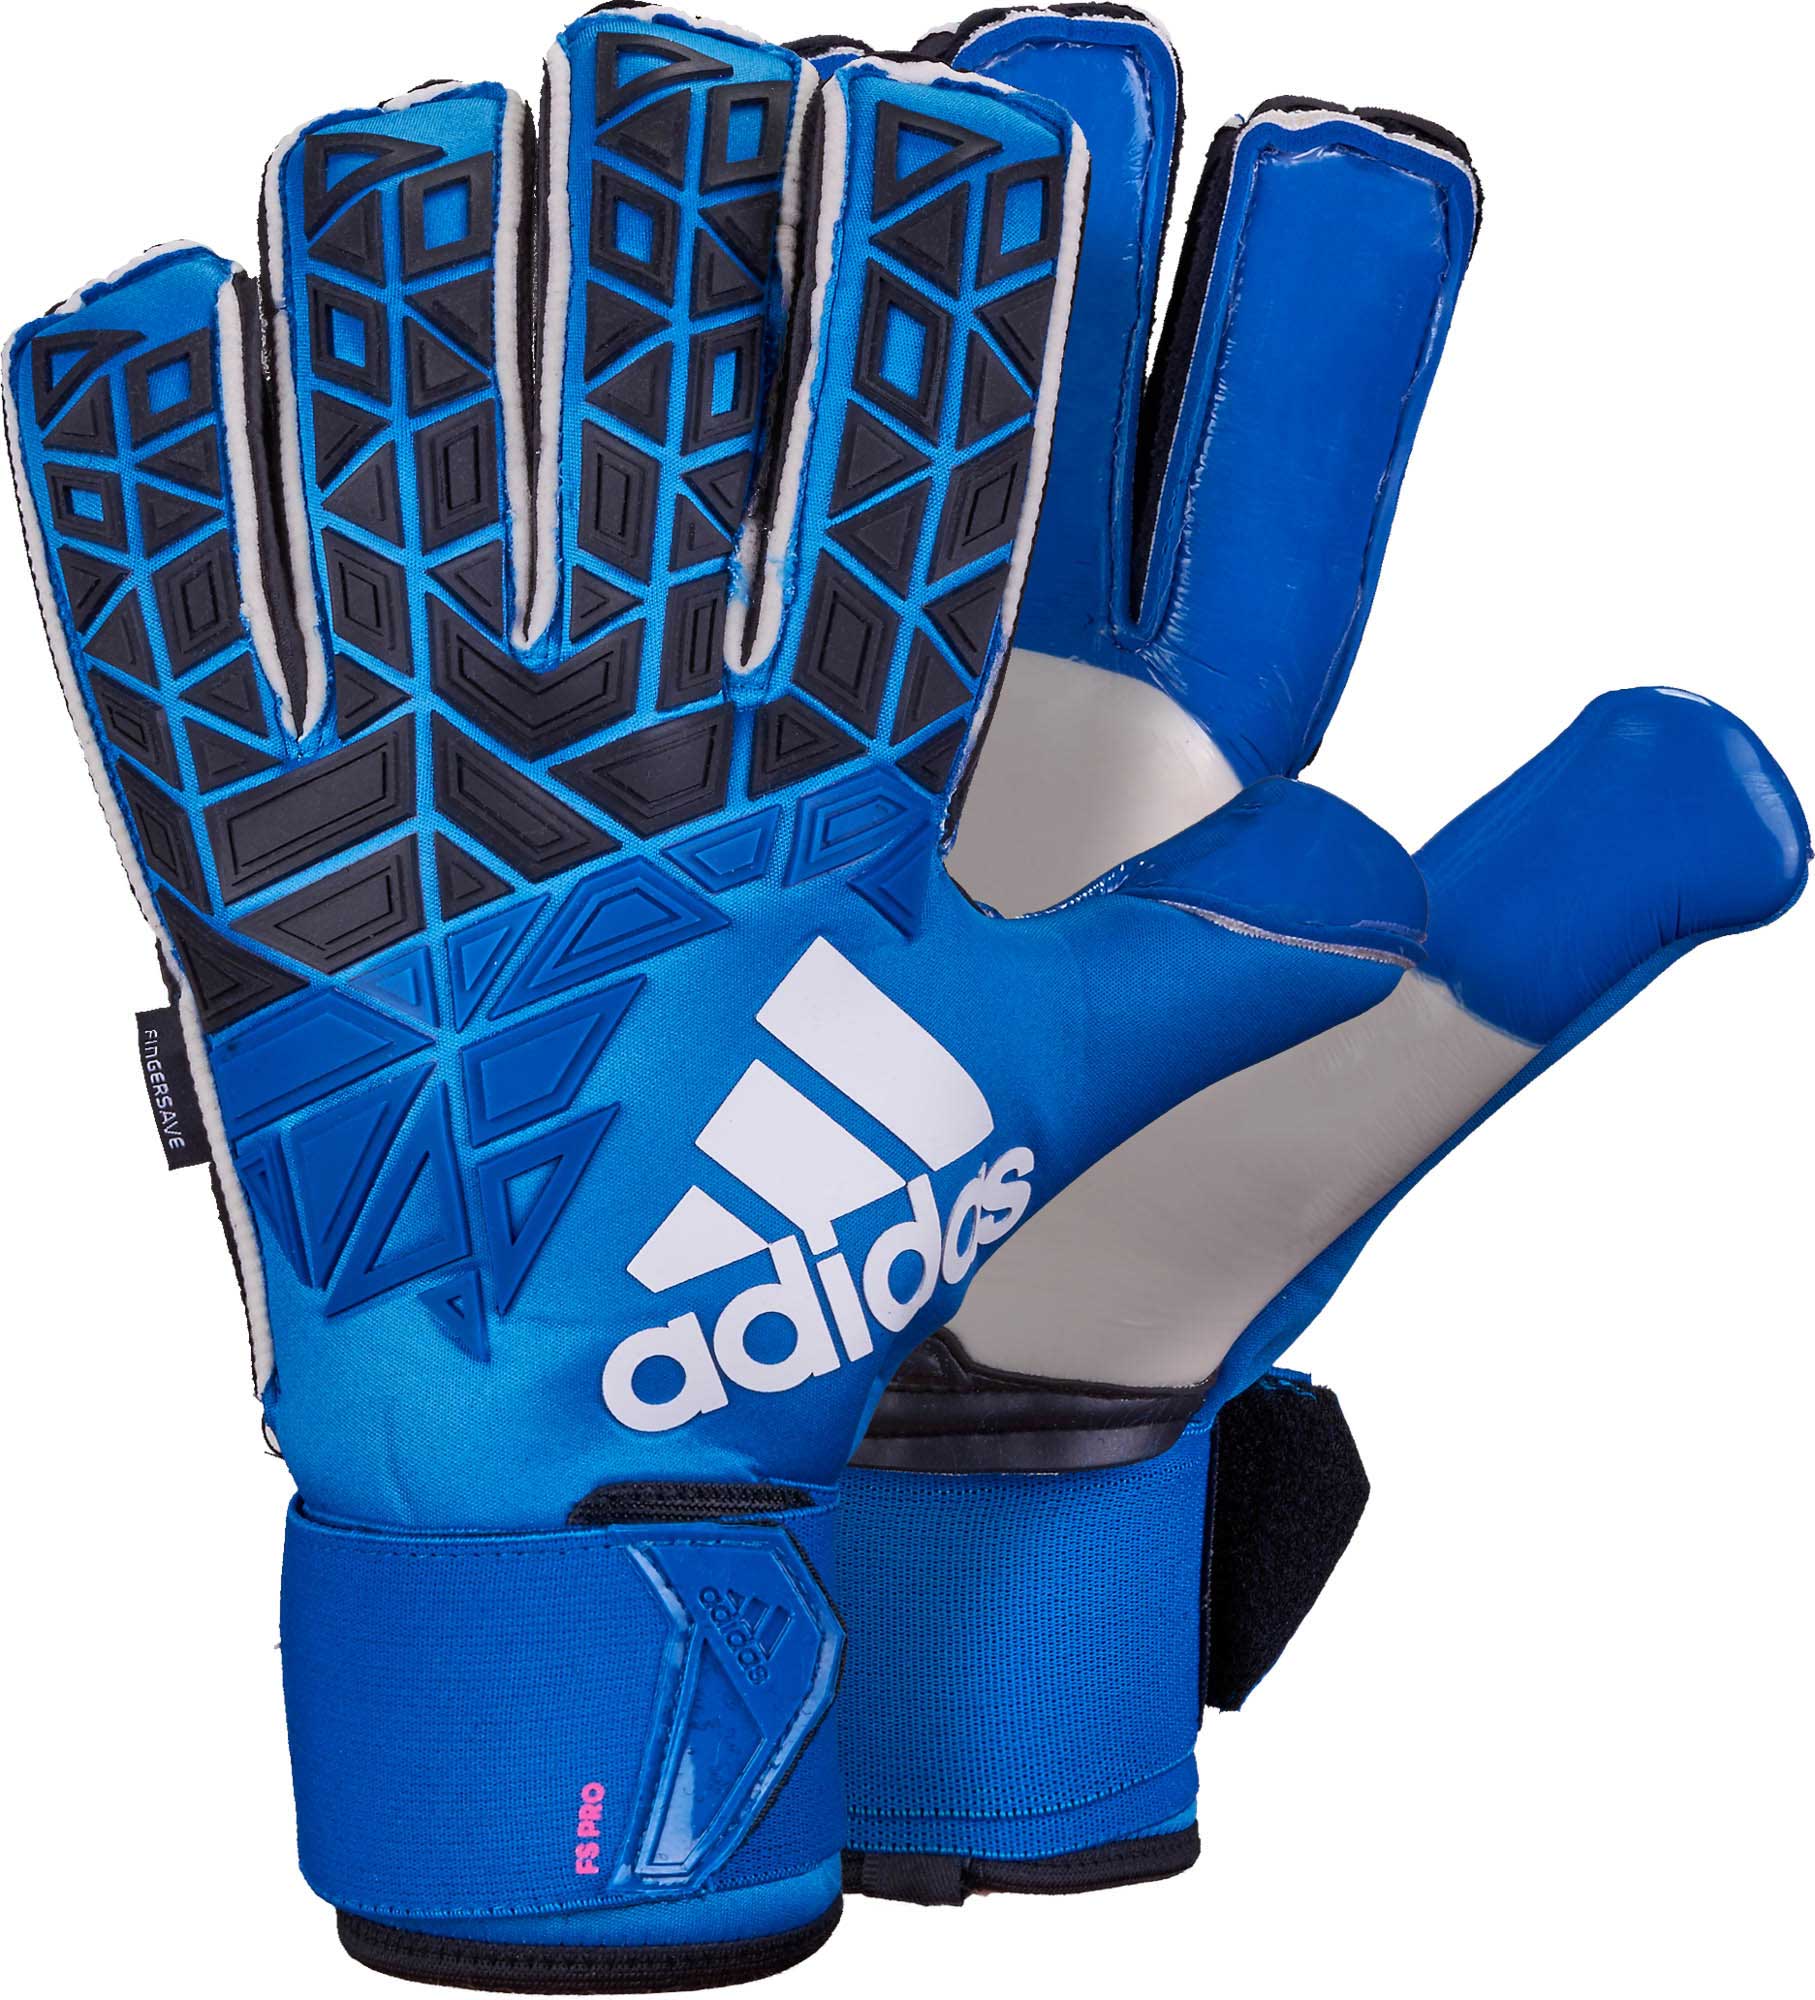 Goalie Goalkeeper Gloves with Pro Fingersaves, Strong Grip for The